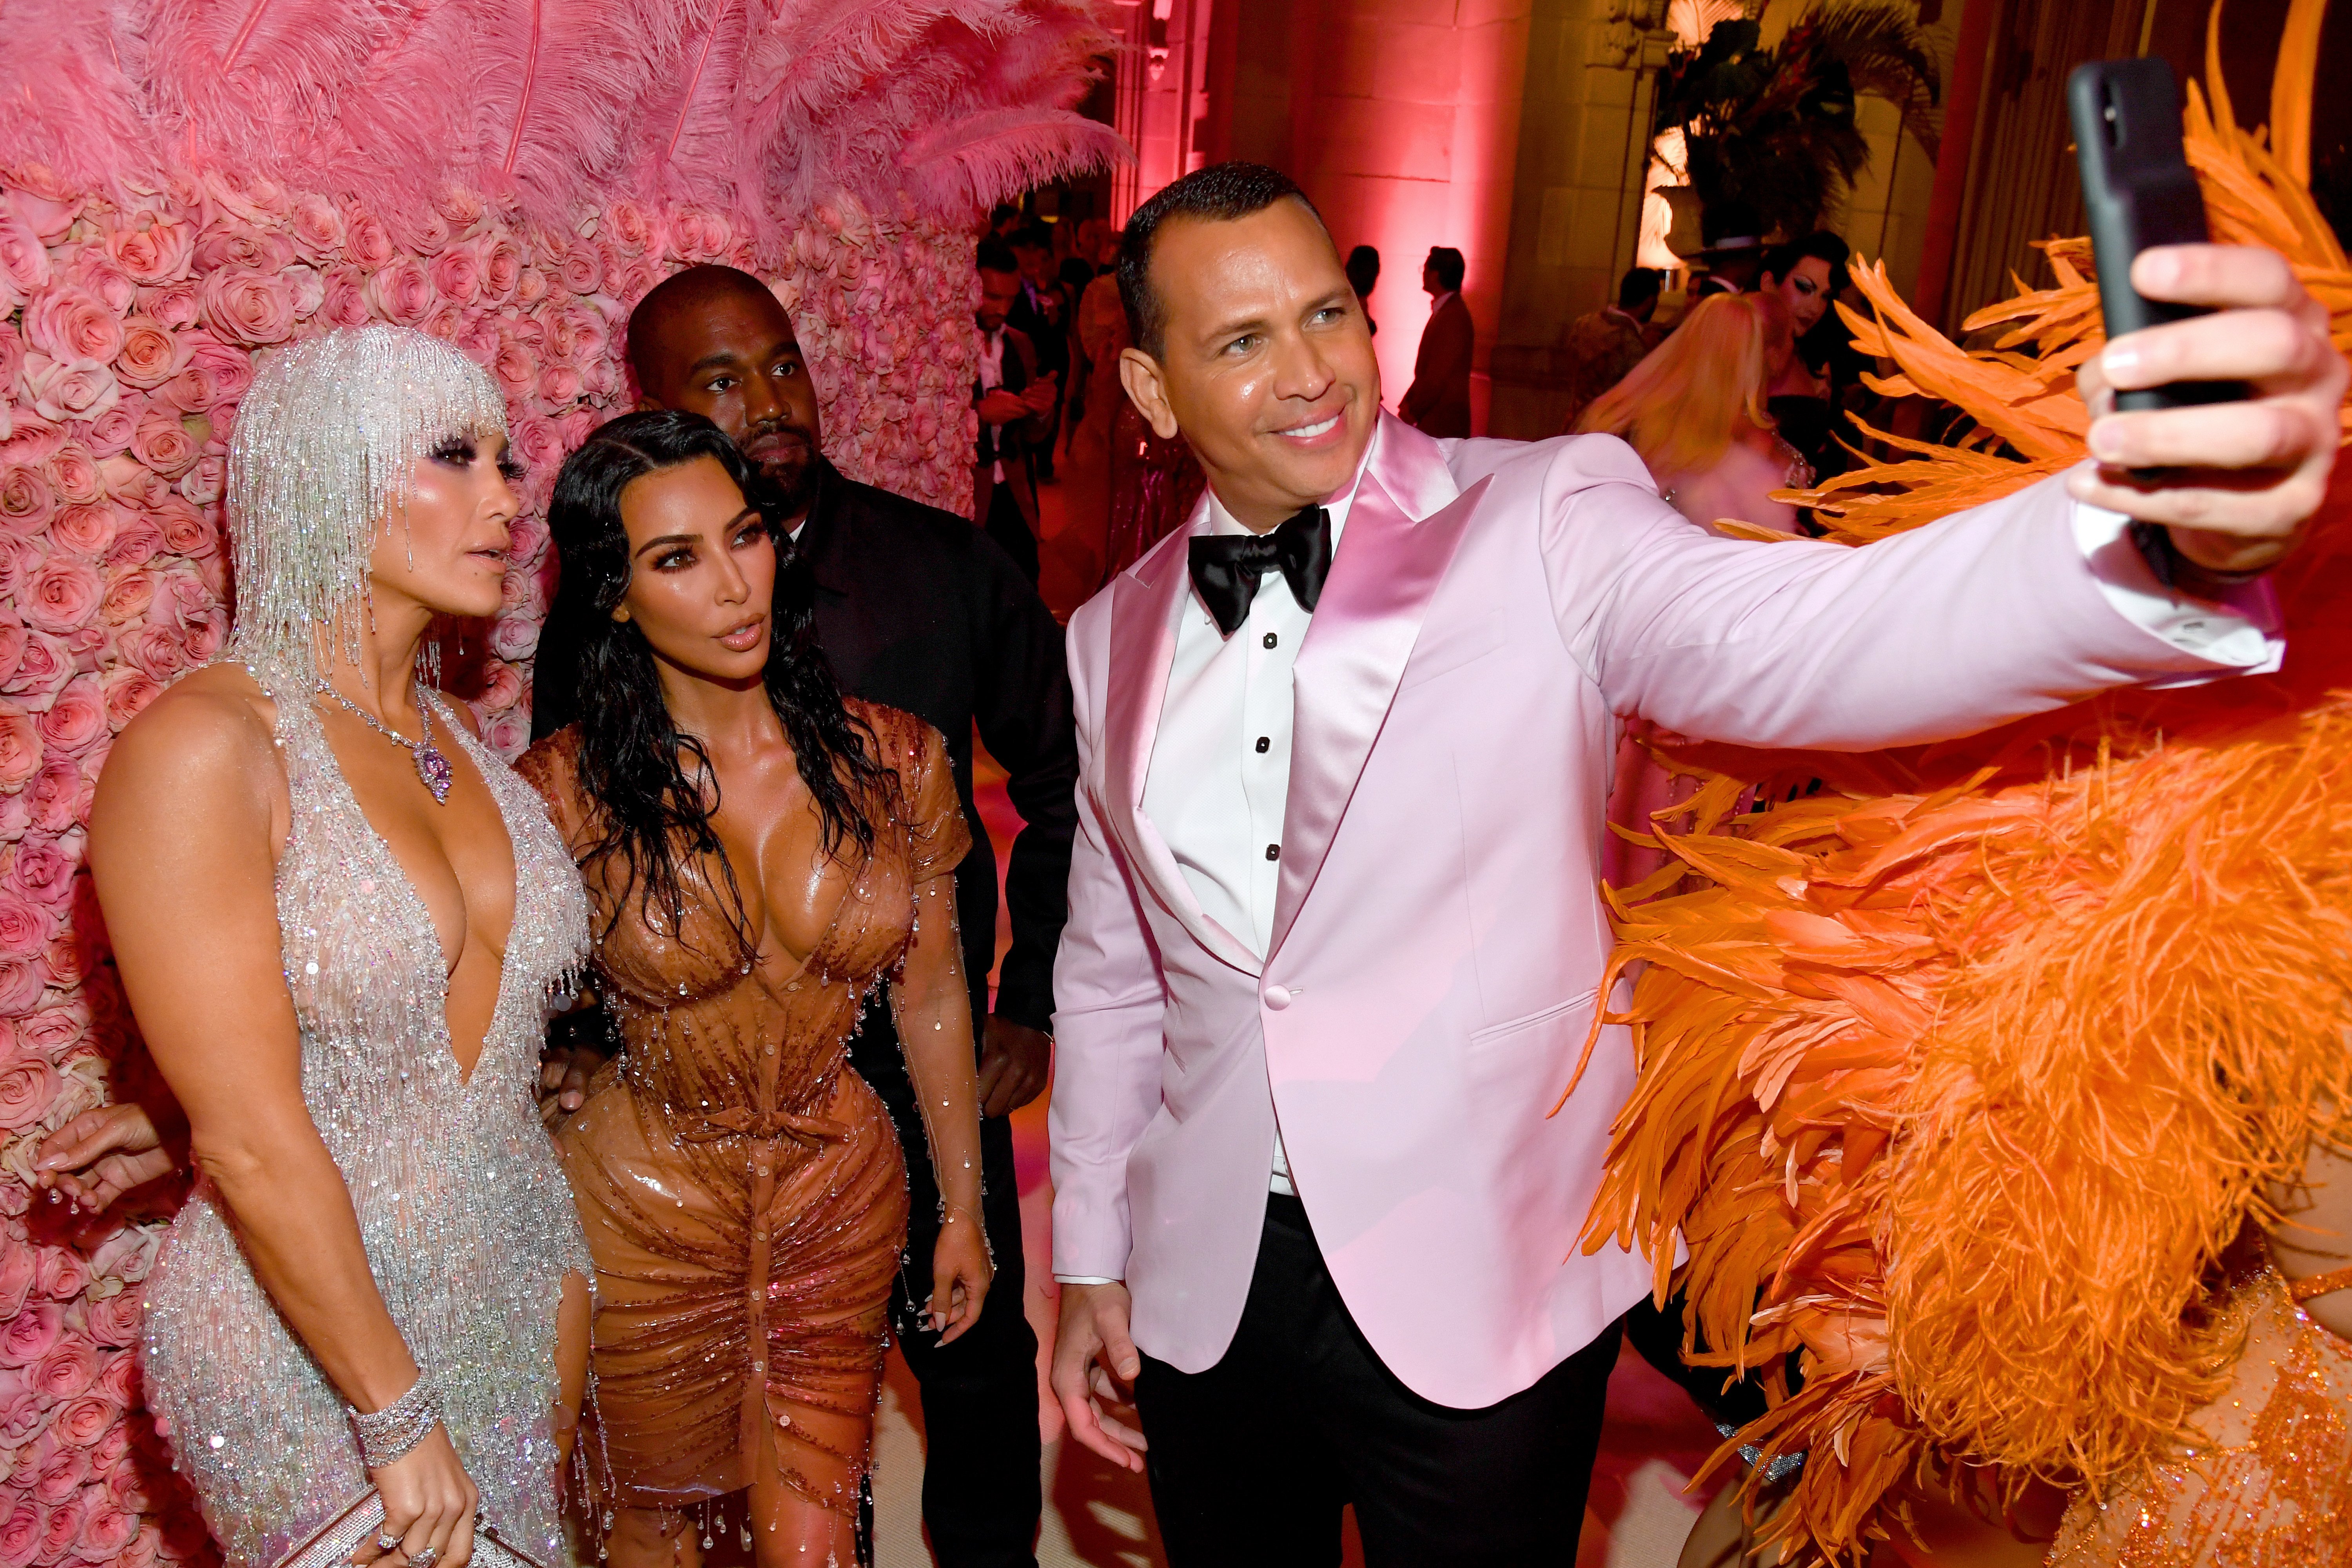 Kim Kardashian and Kanye West posing with Jennifer Lopez and Alex Rodriguez at the 2019 Met Gala | Photo: Getty Images